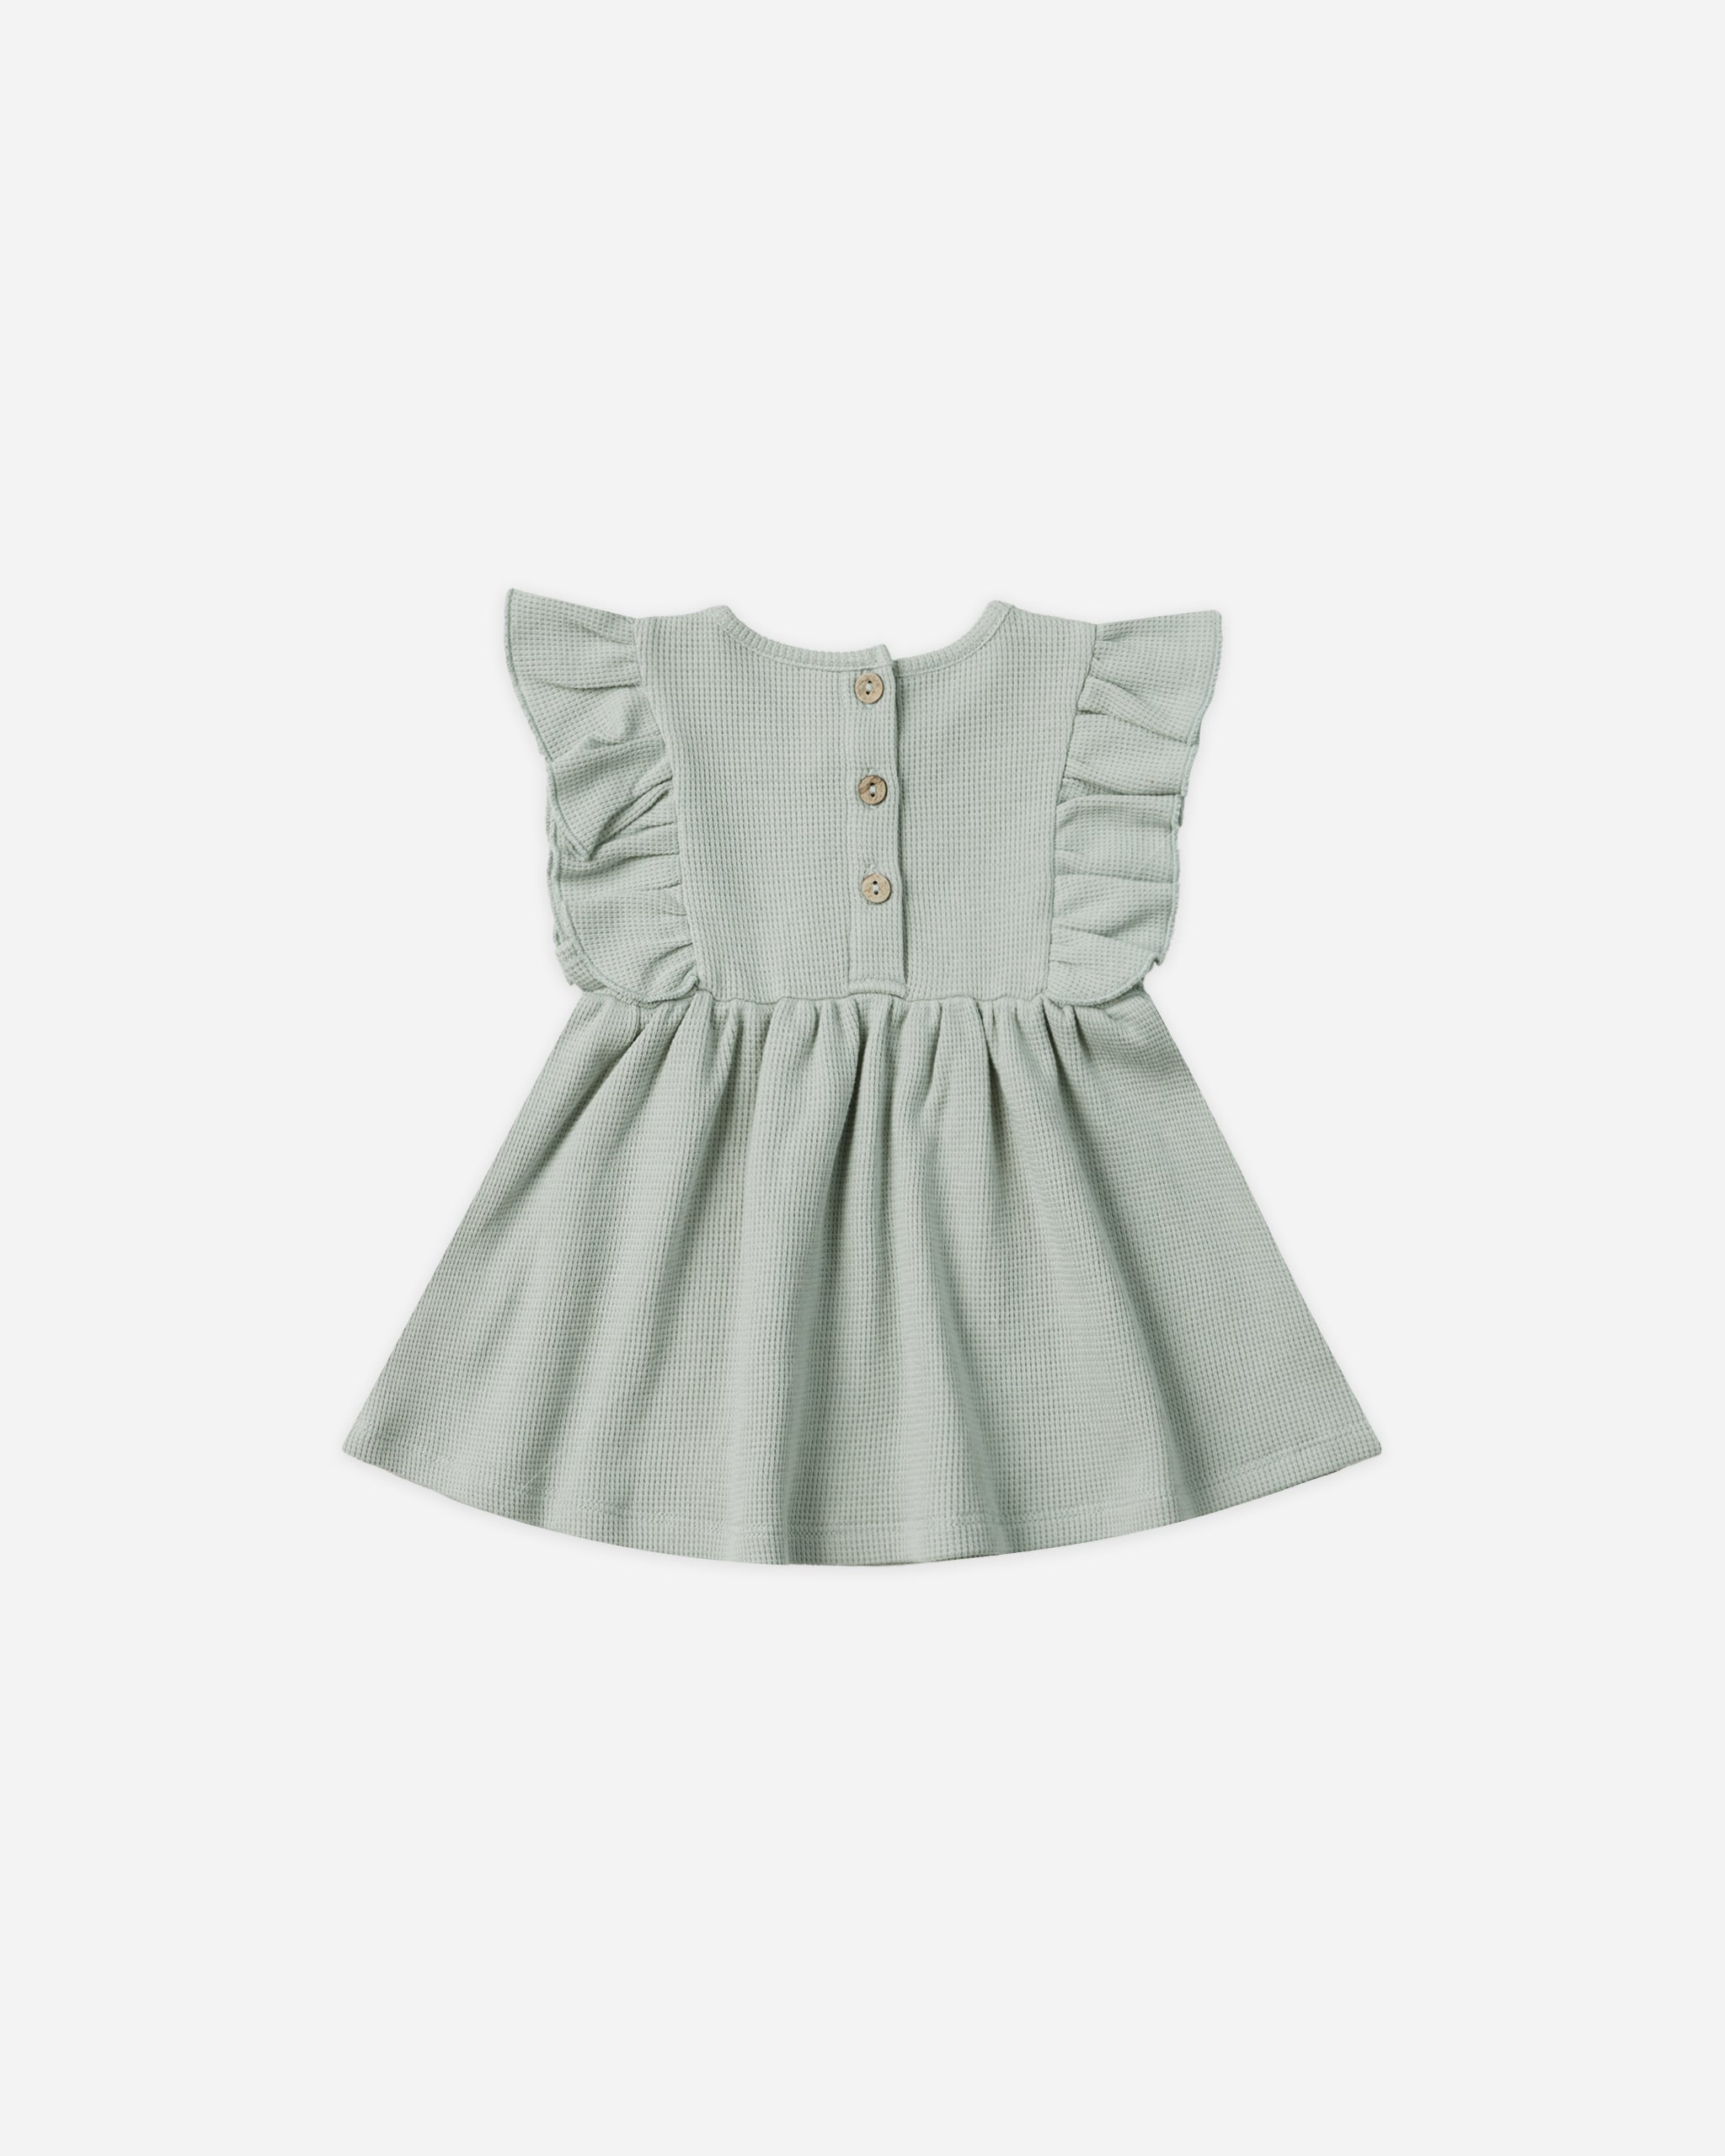 Daisy Dress || Sky - Rylee + Cru | Kids Clothes | Trendy Baby Clothes | Modern Infant Outfits |